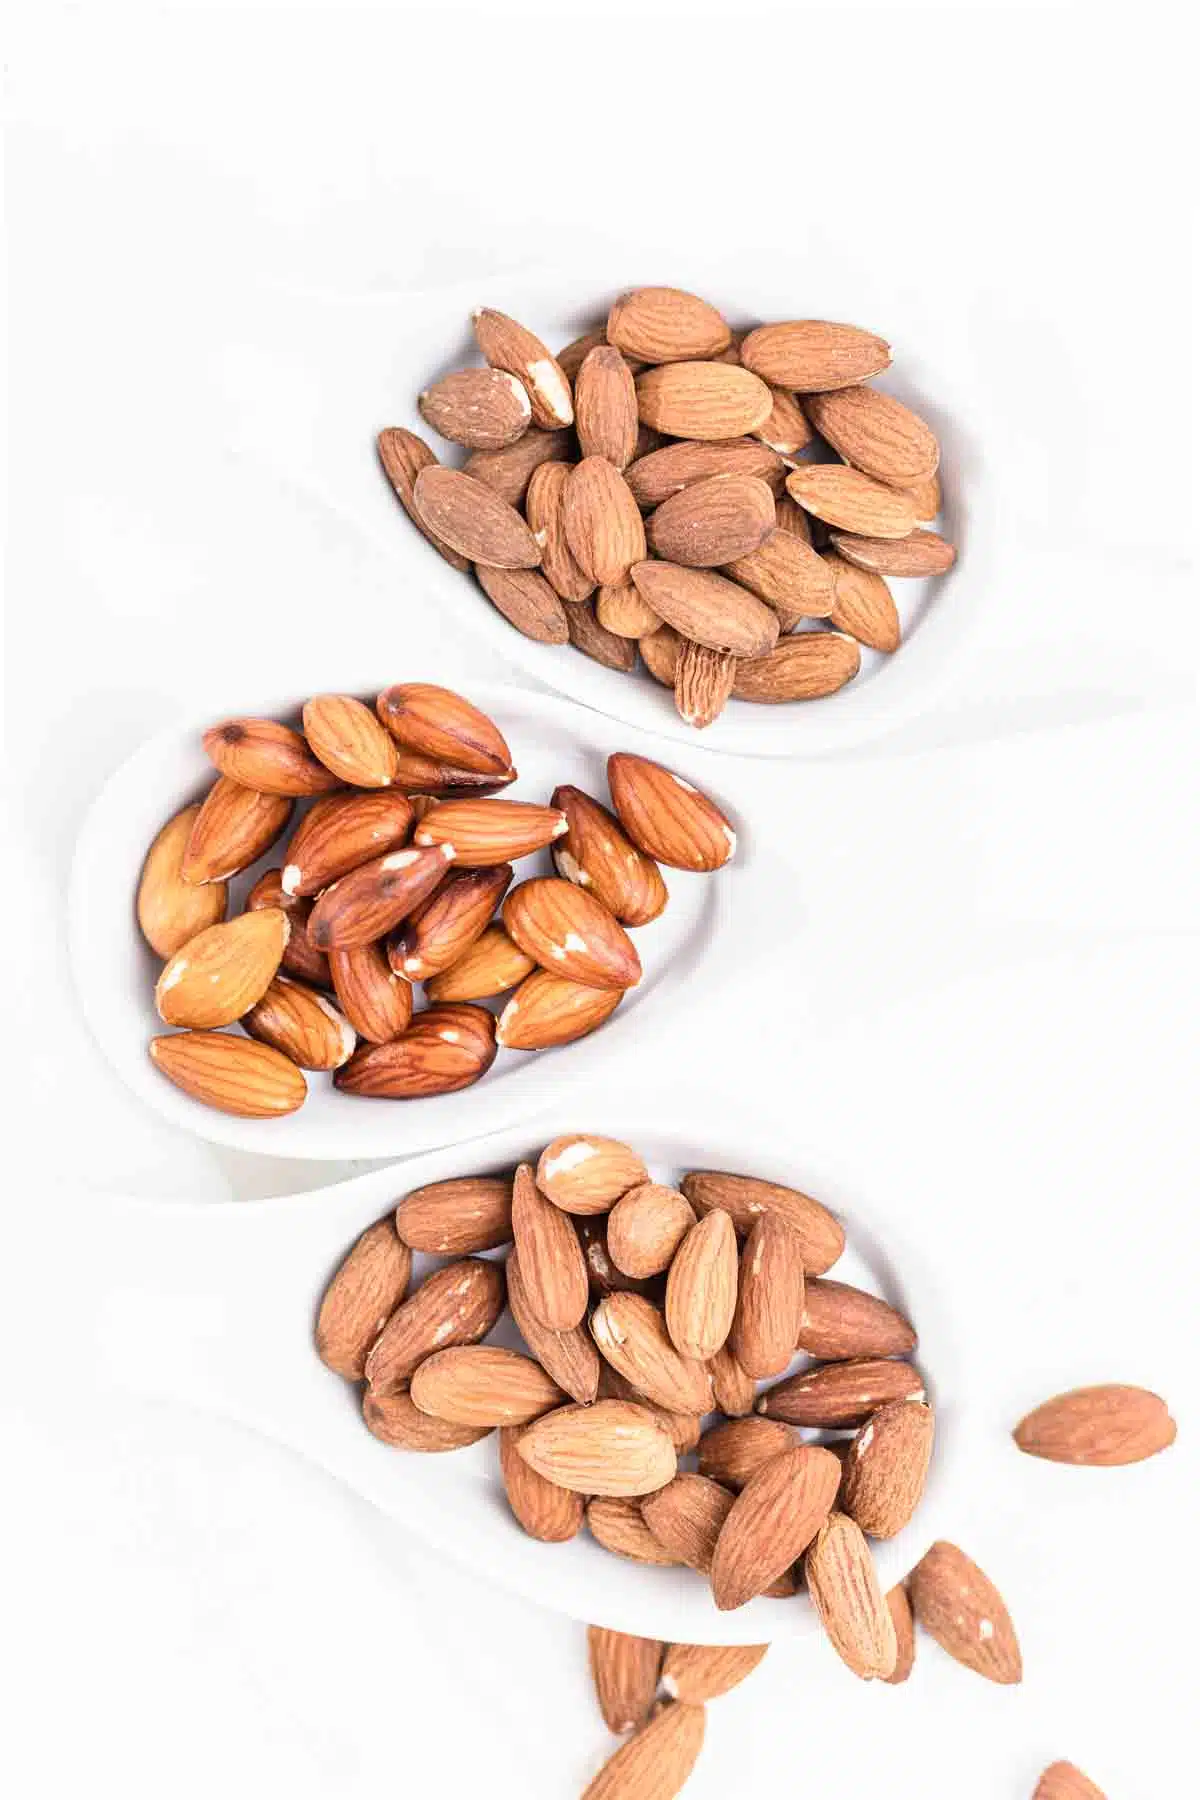 Activated Almonds on a white plates.